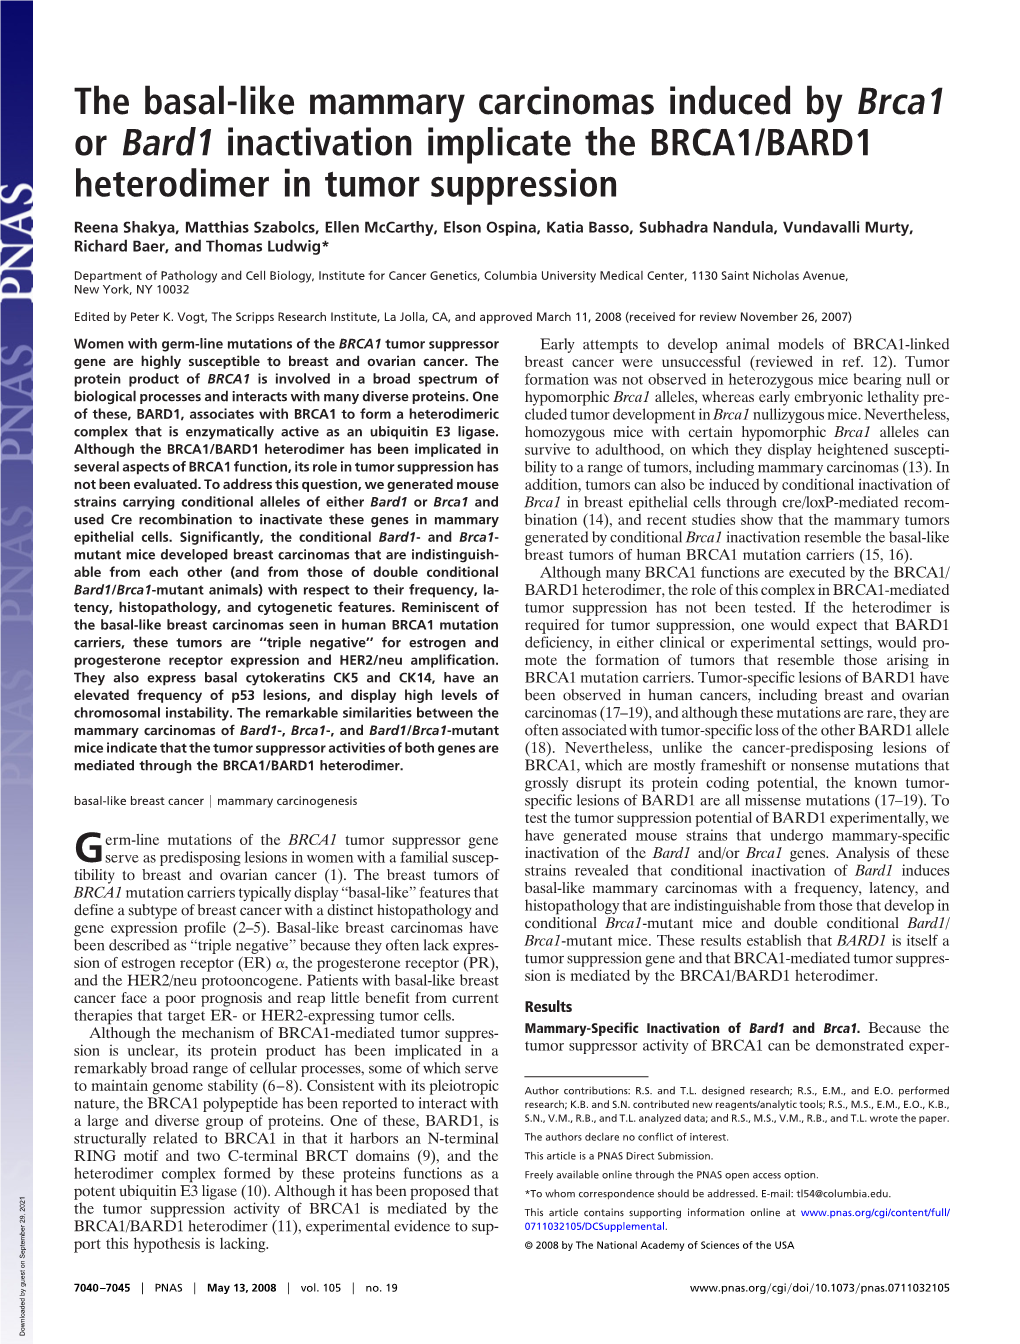 The Basal-Like Mammary Carcinomas Induced by Brca1 Or Bard1 Inactivation Implicate the BRCA1/BARD1 Heterodimer in Tumor Suppression